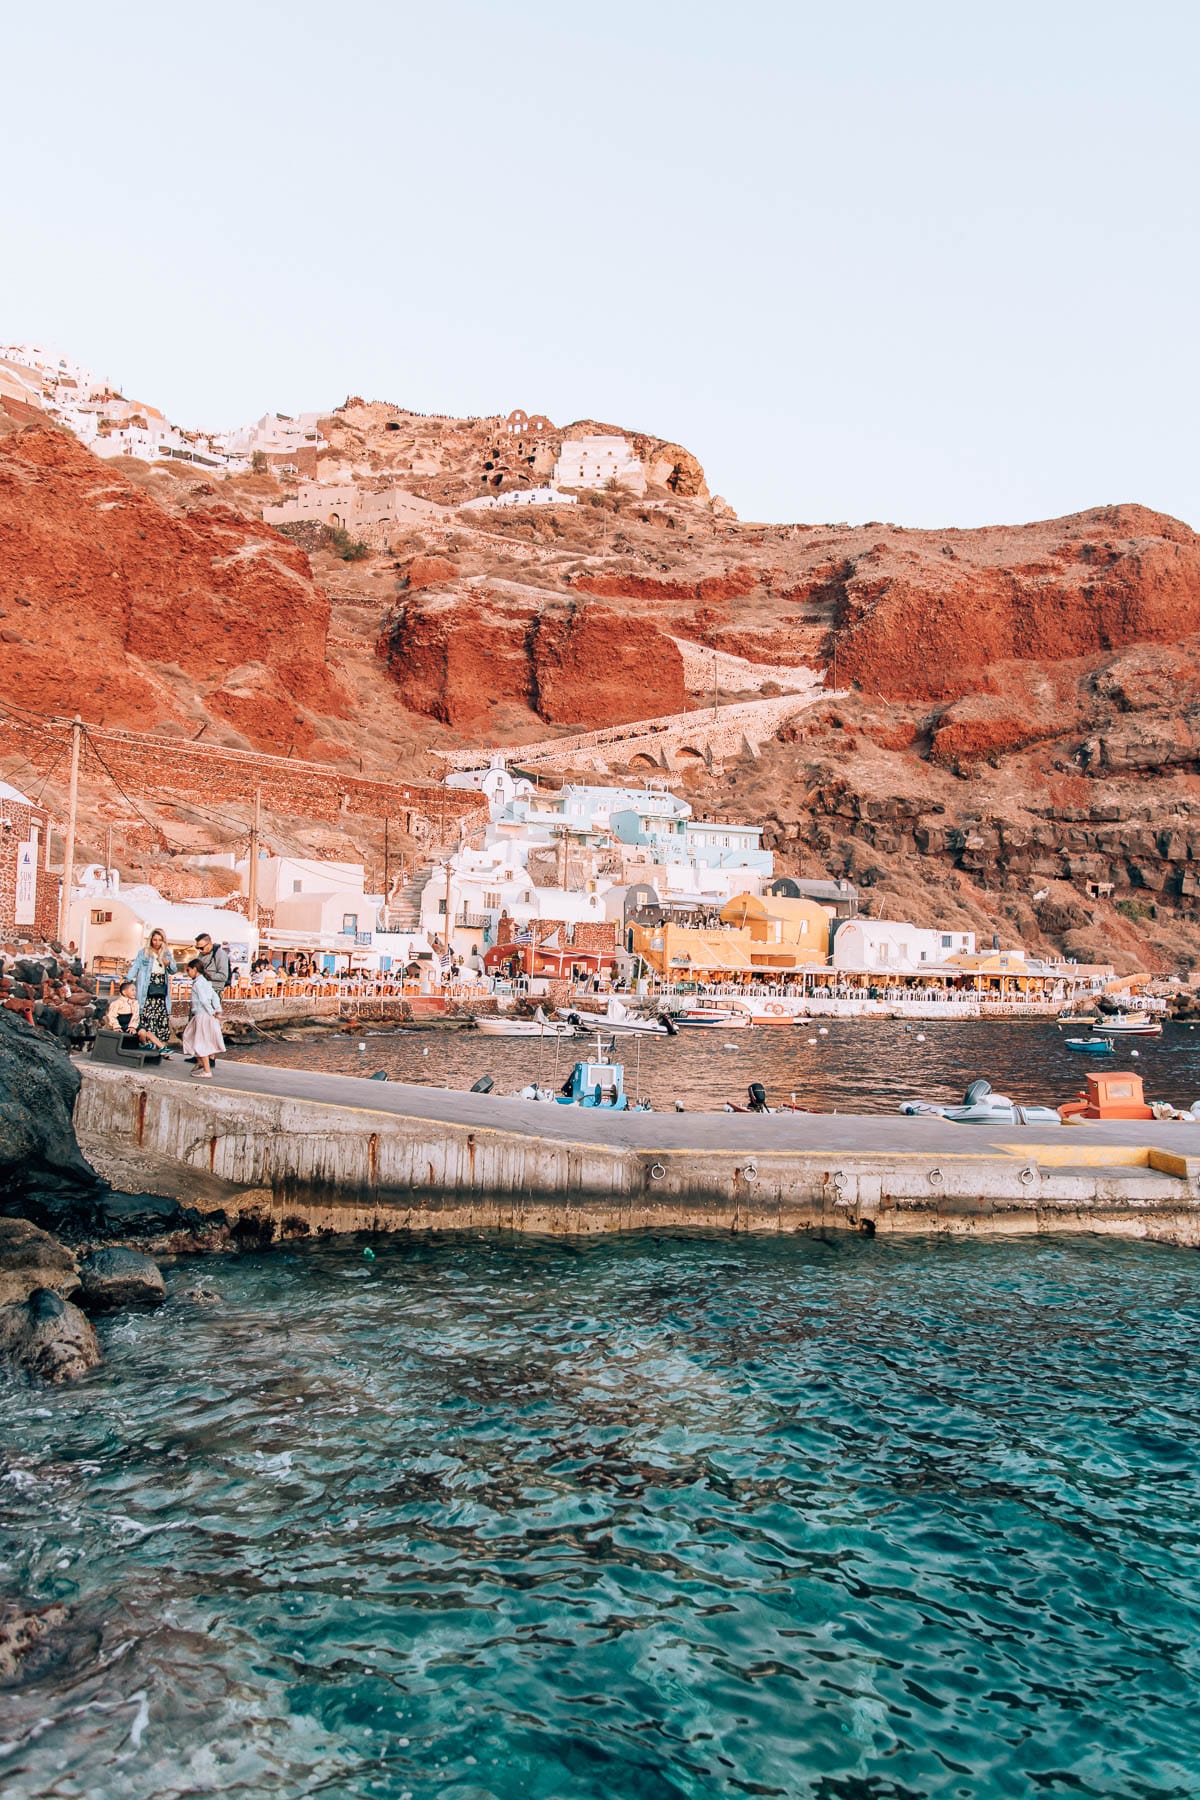 The perfect Santorini itinerary, by travel bloggers Babes That Wander